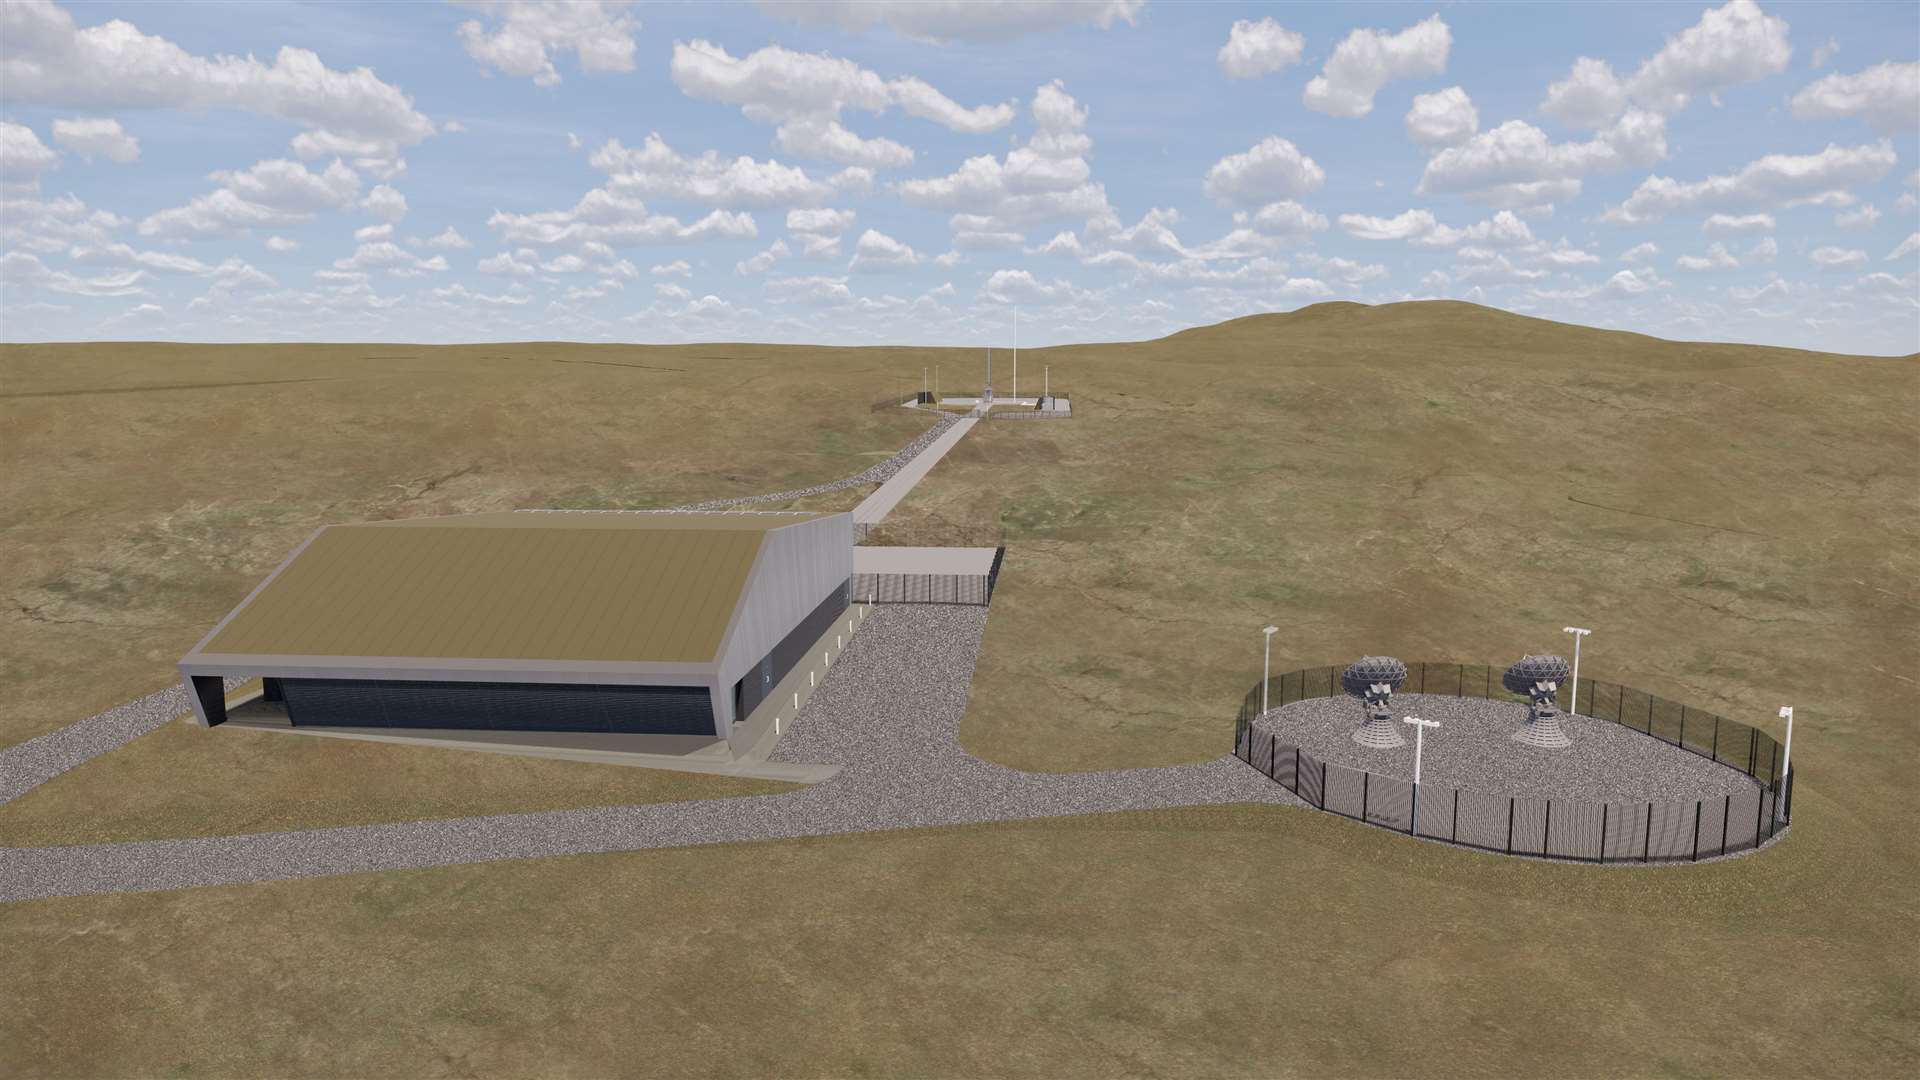 The Sutherland Space Hub faces a legal challenge against the planning approval which was granted by Highland Council.